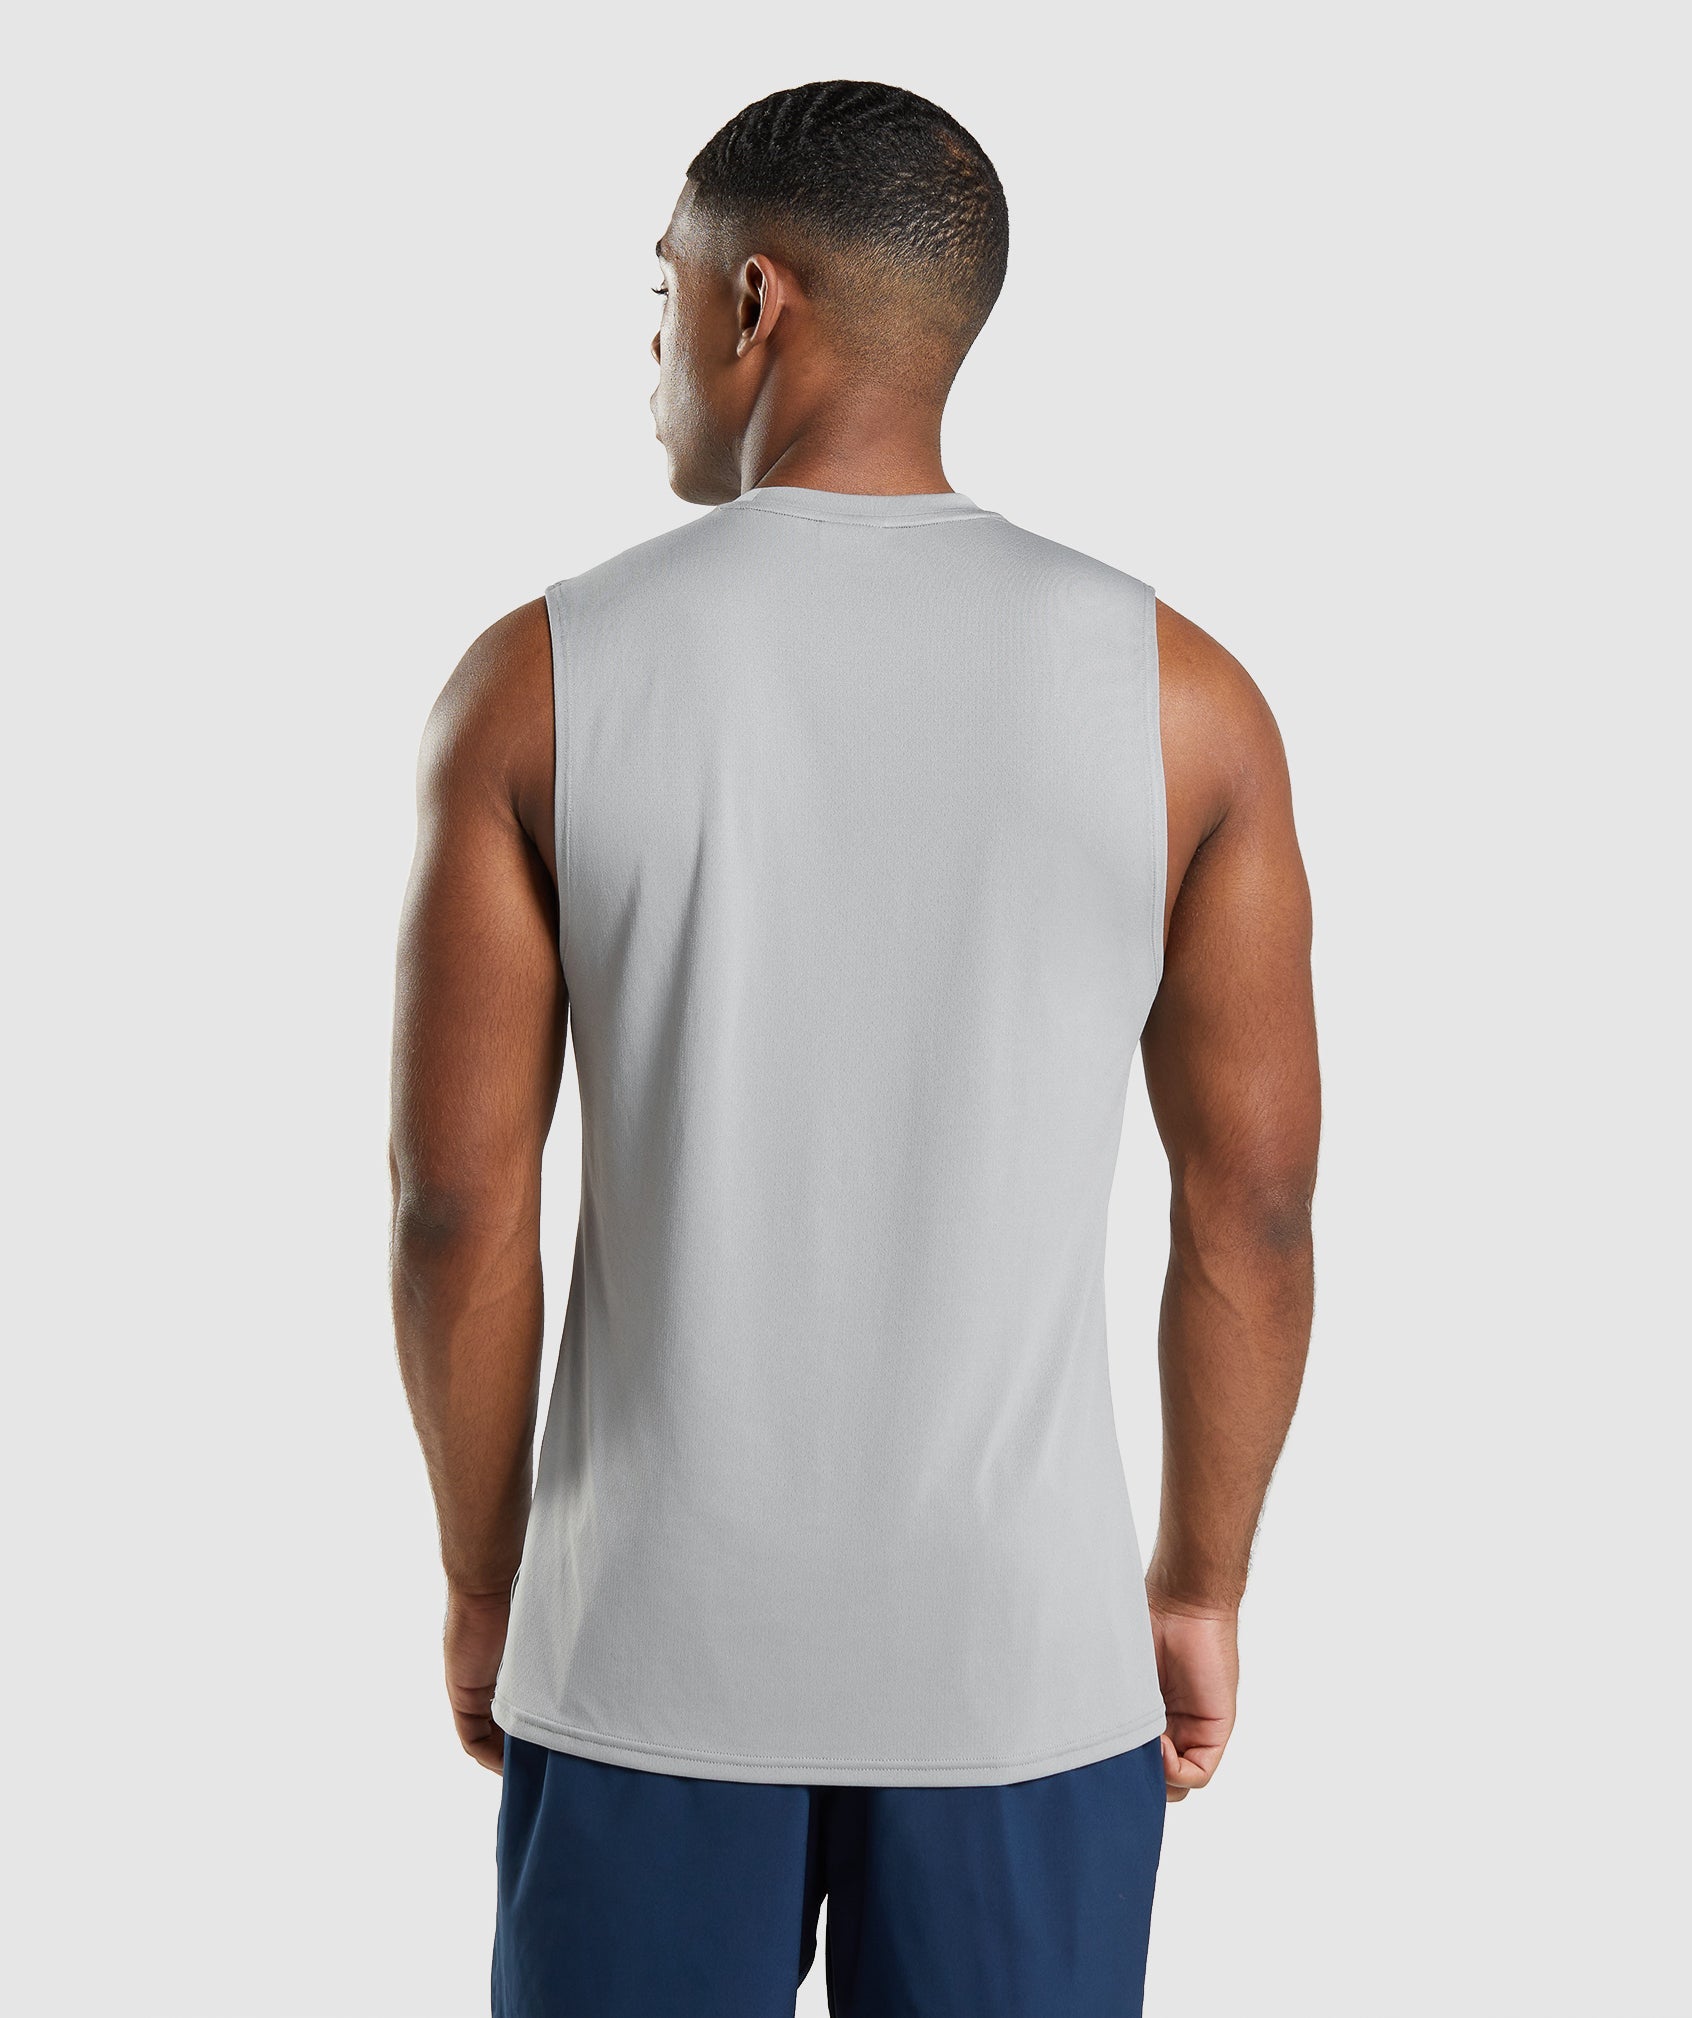 Arrival Sleeveless T-Shirt in Smokey Grey - view 3